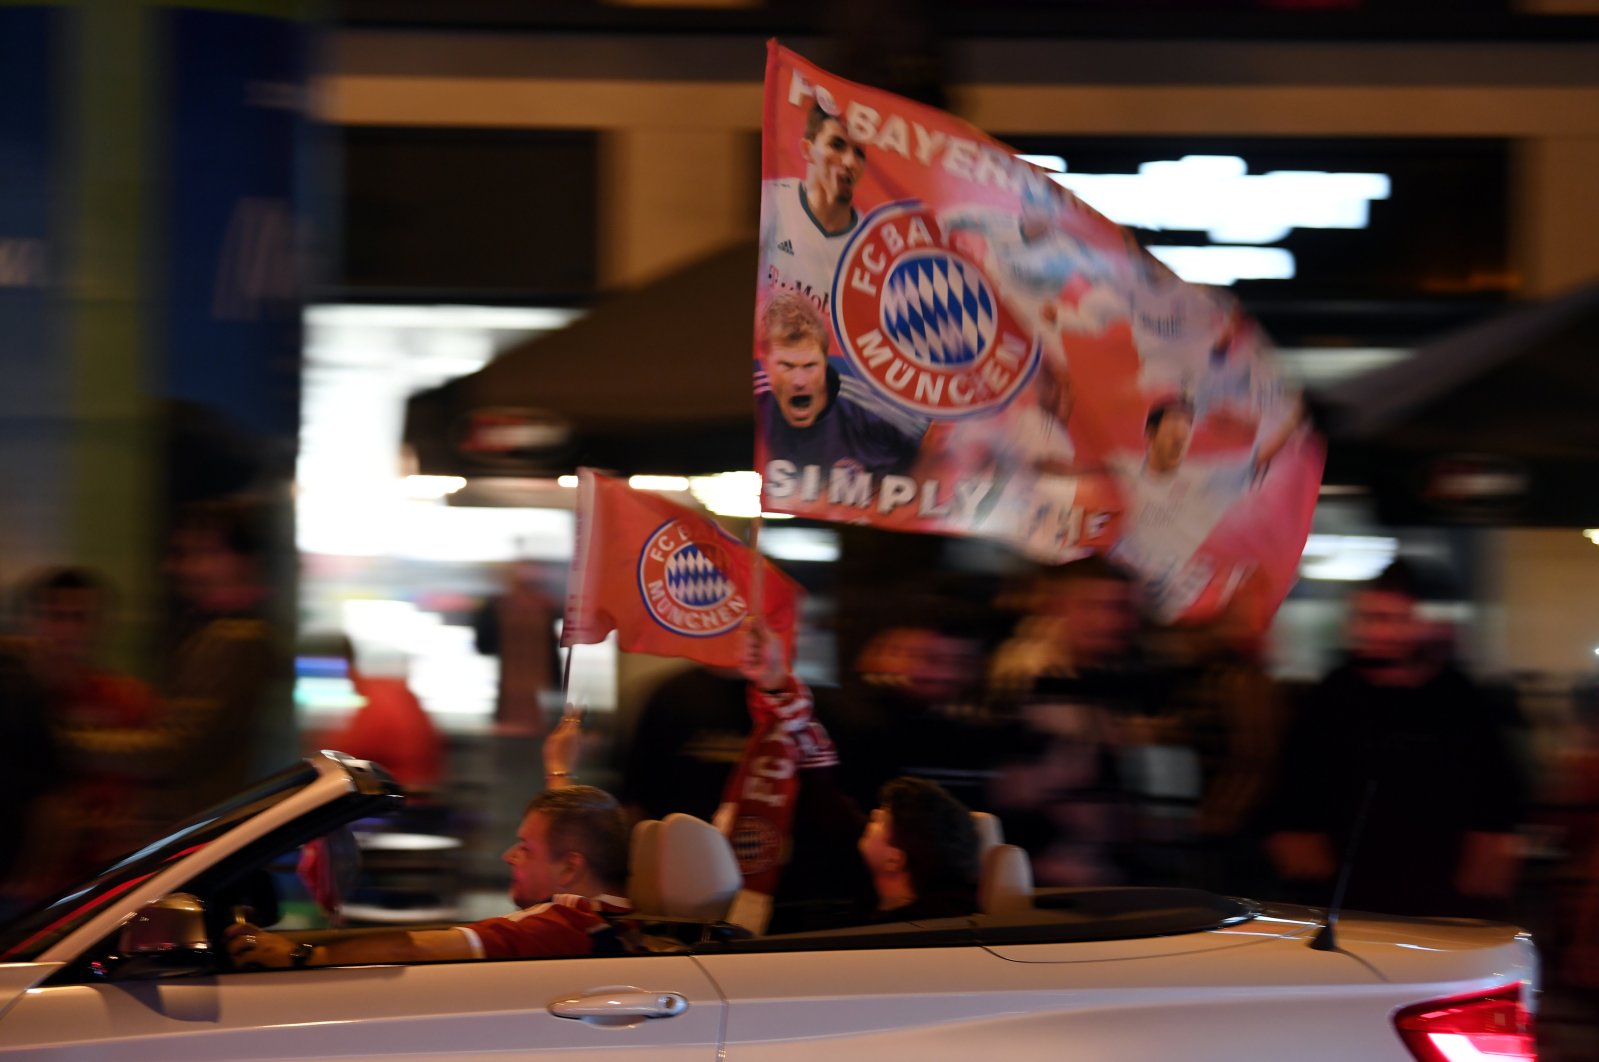 Bayern Munich fans celebrate winning the Champions League, as play resumes behind closed doors following the outbreak of the coronavirus disease (COVID-19), August 23, 2020. (Reuters Photo)